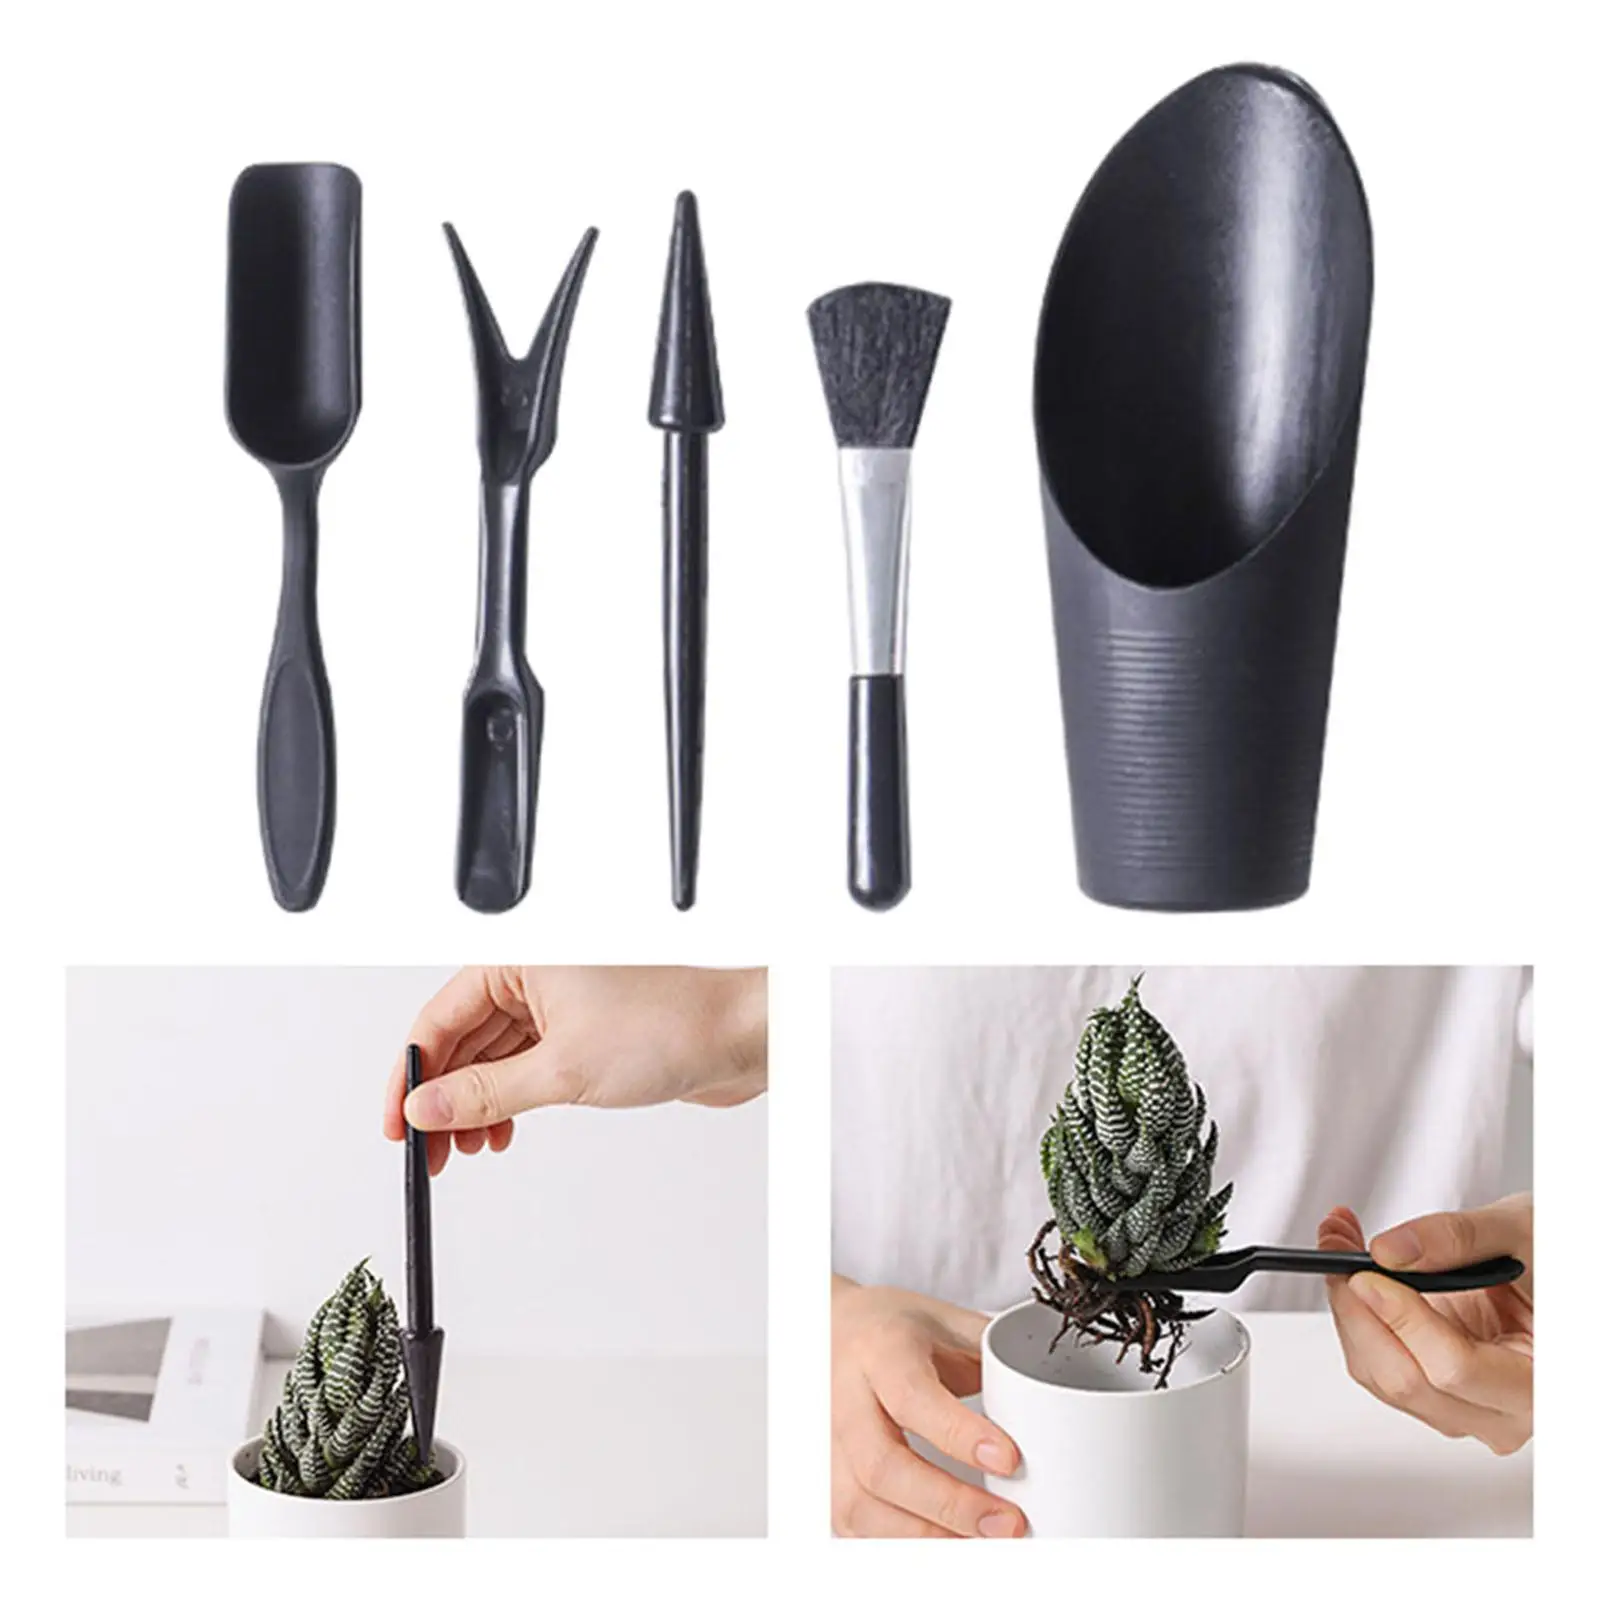 Succulent Hand Transplanting Tools set of 5Pcs for Cactus, Houseplant, Bonsai Tools Durable Accessories Easy to Carry